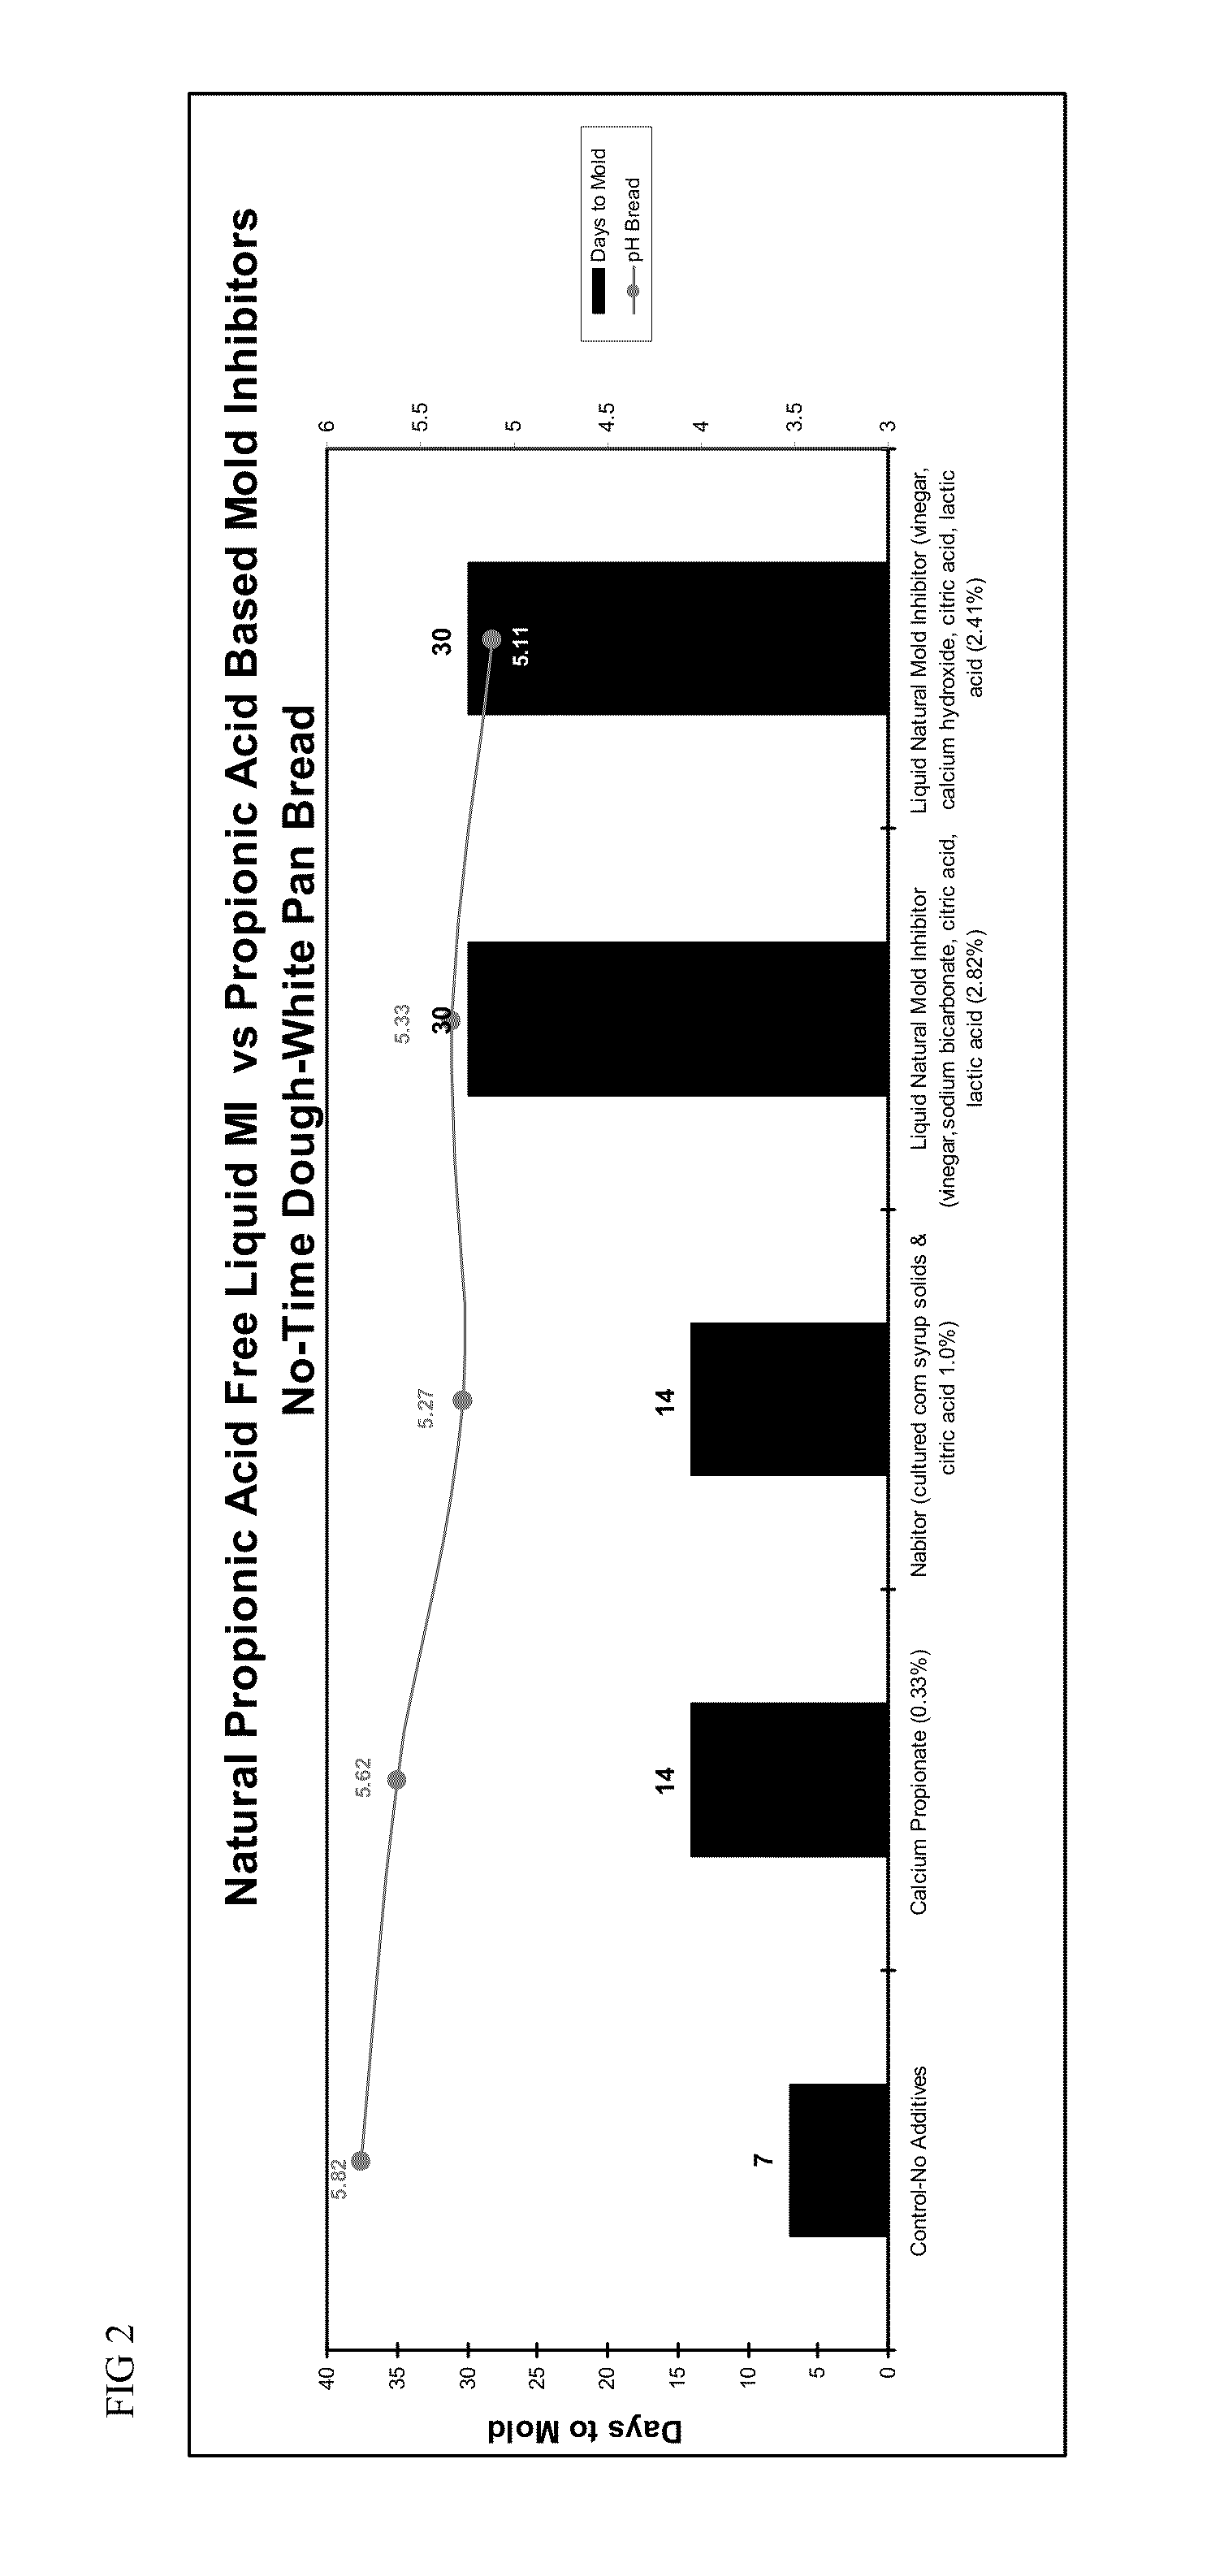 Natural Mold Inhibitor and Methods of Using Same